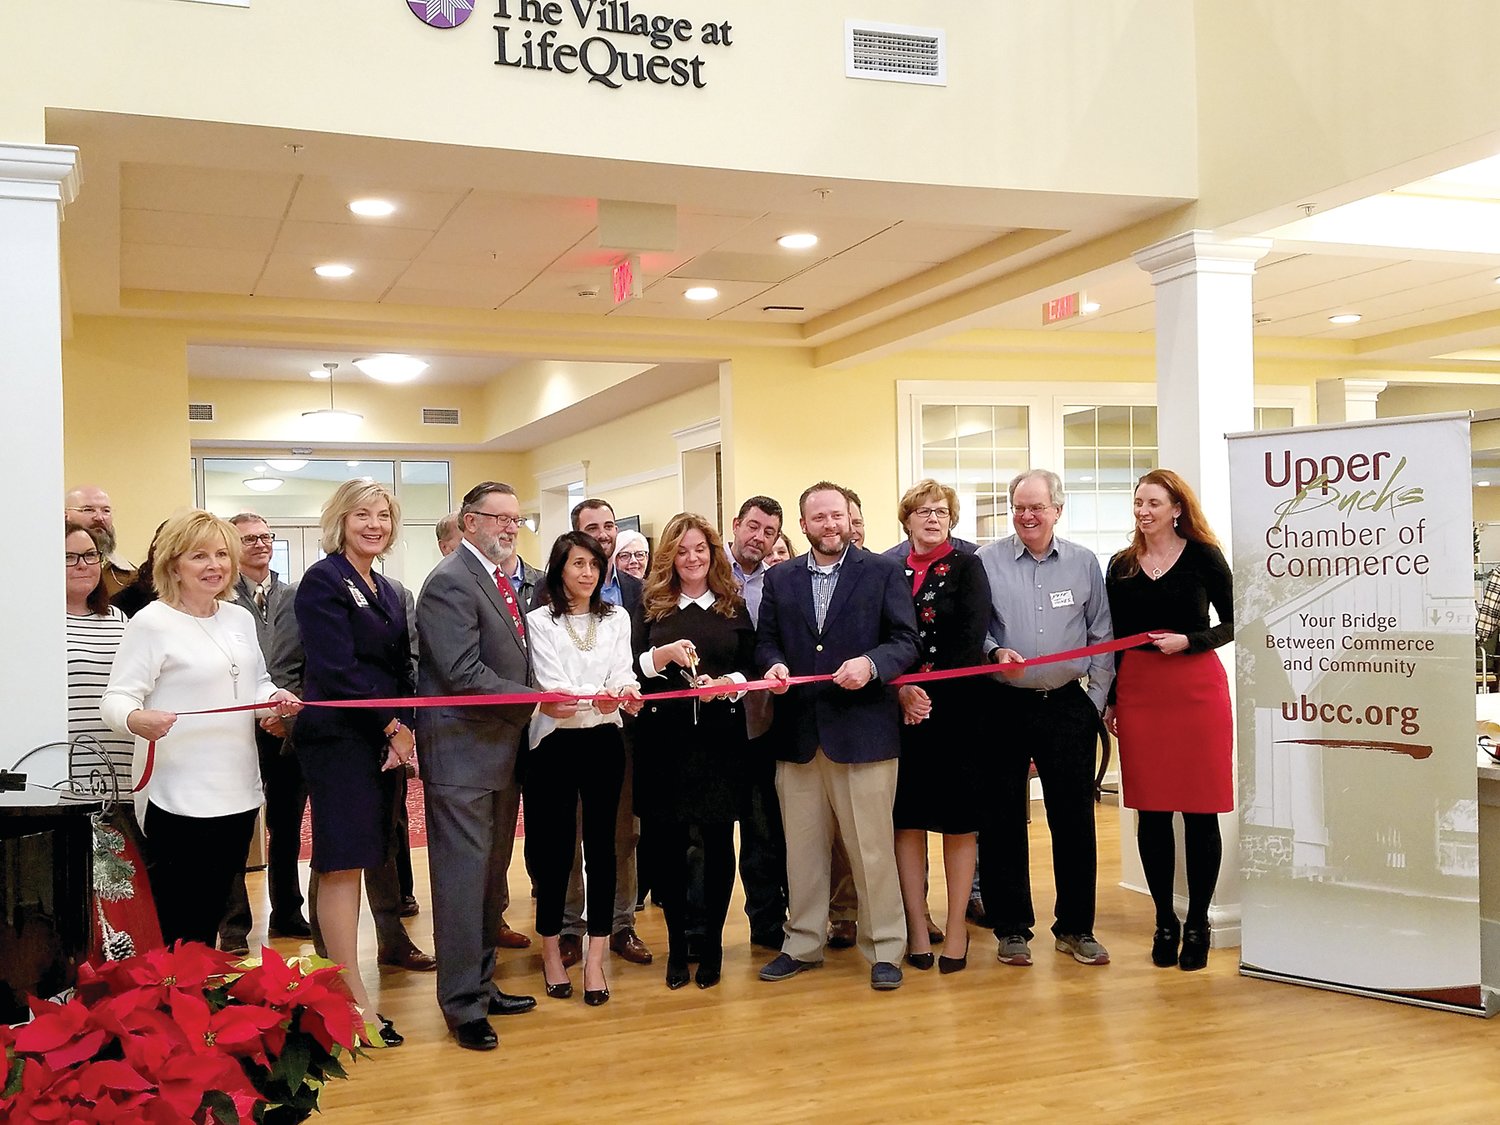 Quakertown Alive and Upper Bucks Chamber of Commerce were on hand to cut a ribbon Dec. 13 to kick off The Village at LifeQuest on Route 663 in Milford Township. Photograph by Melinda Rizzo.